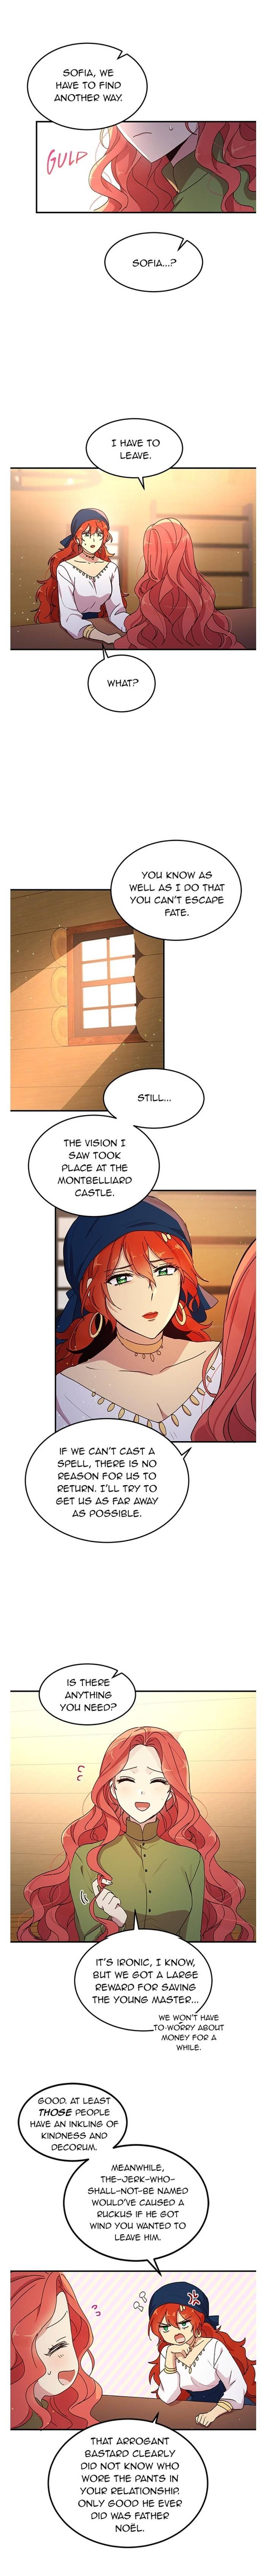 Why Are You Doing This, My Duke!? Webtoon - chapter 85 - #5